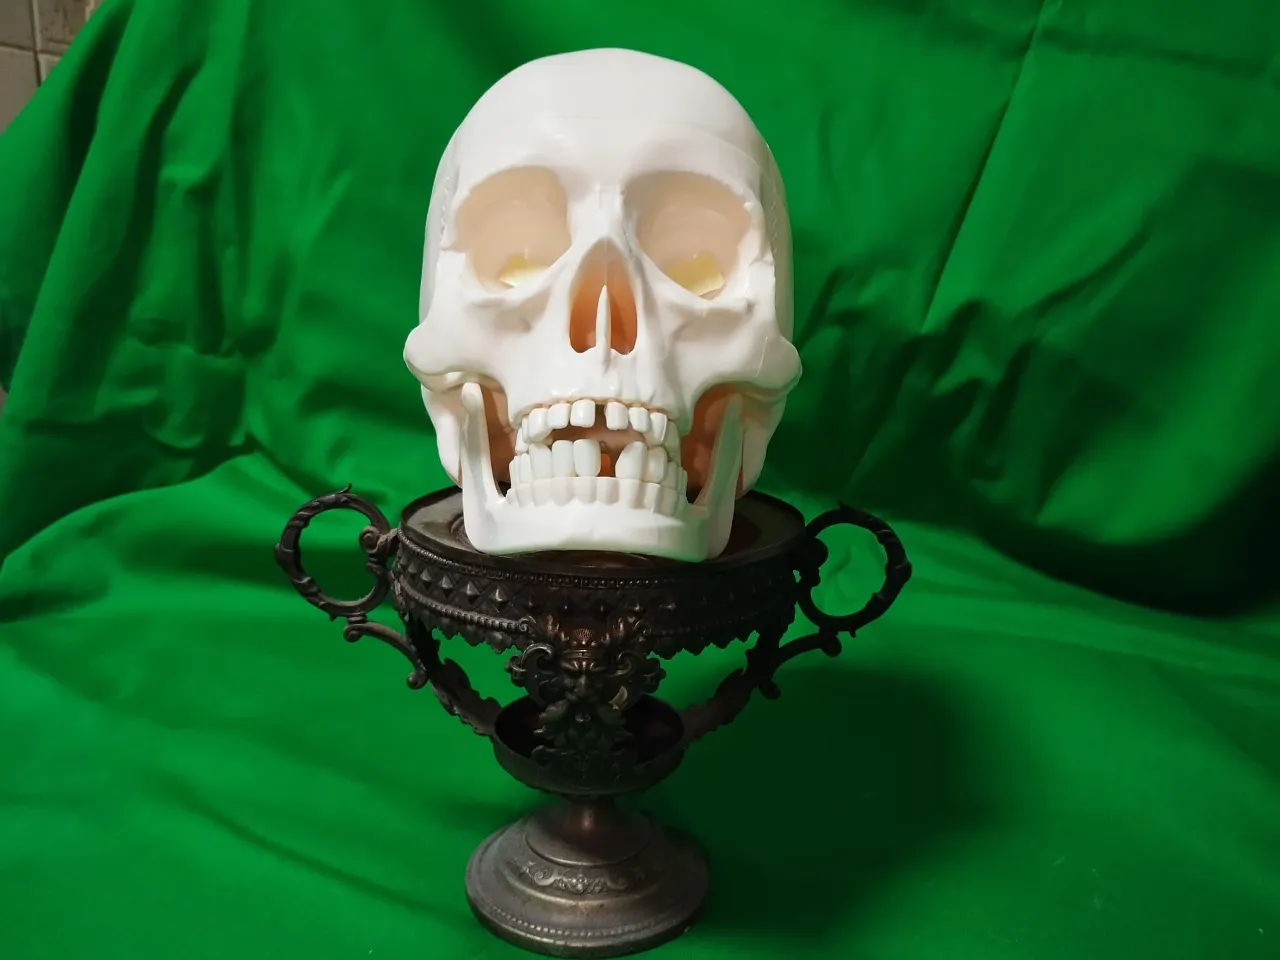 a fake skull sitting on top of a vase